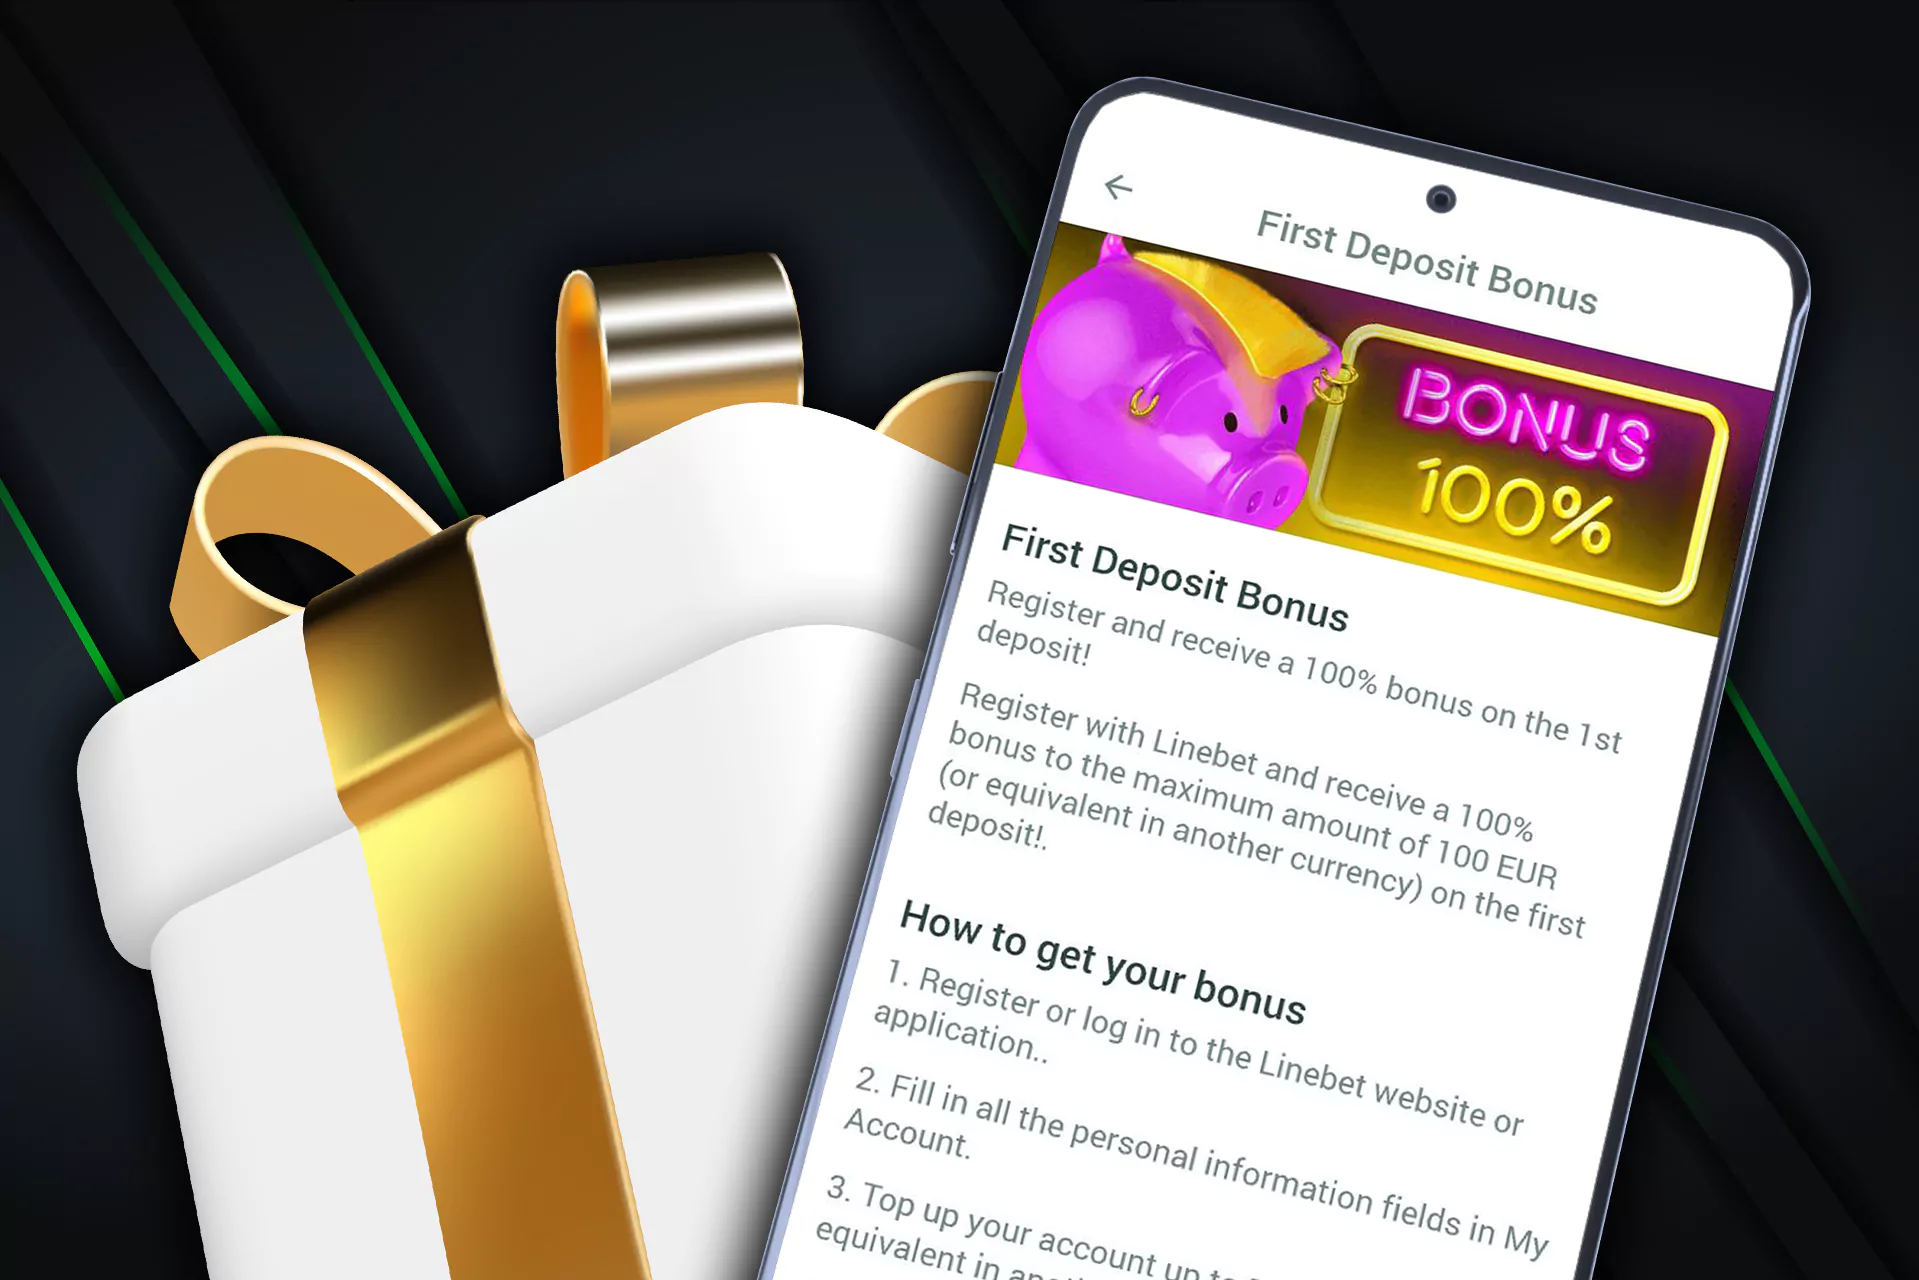 Get up to 100% on your first deposit as a Linebet betting bonus.